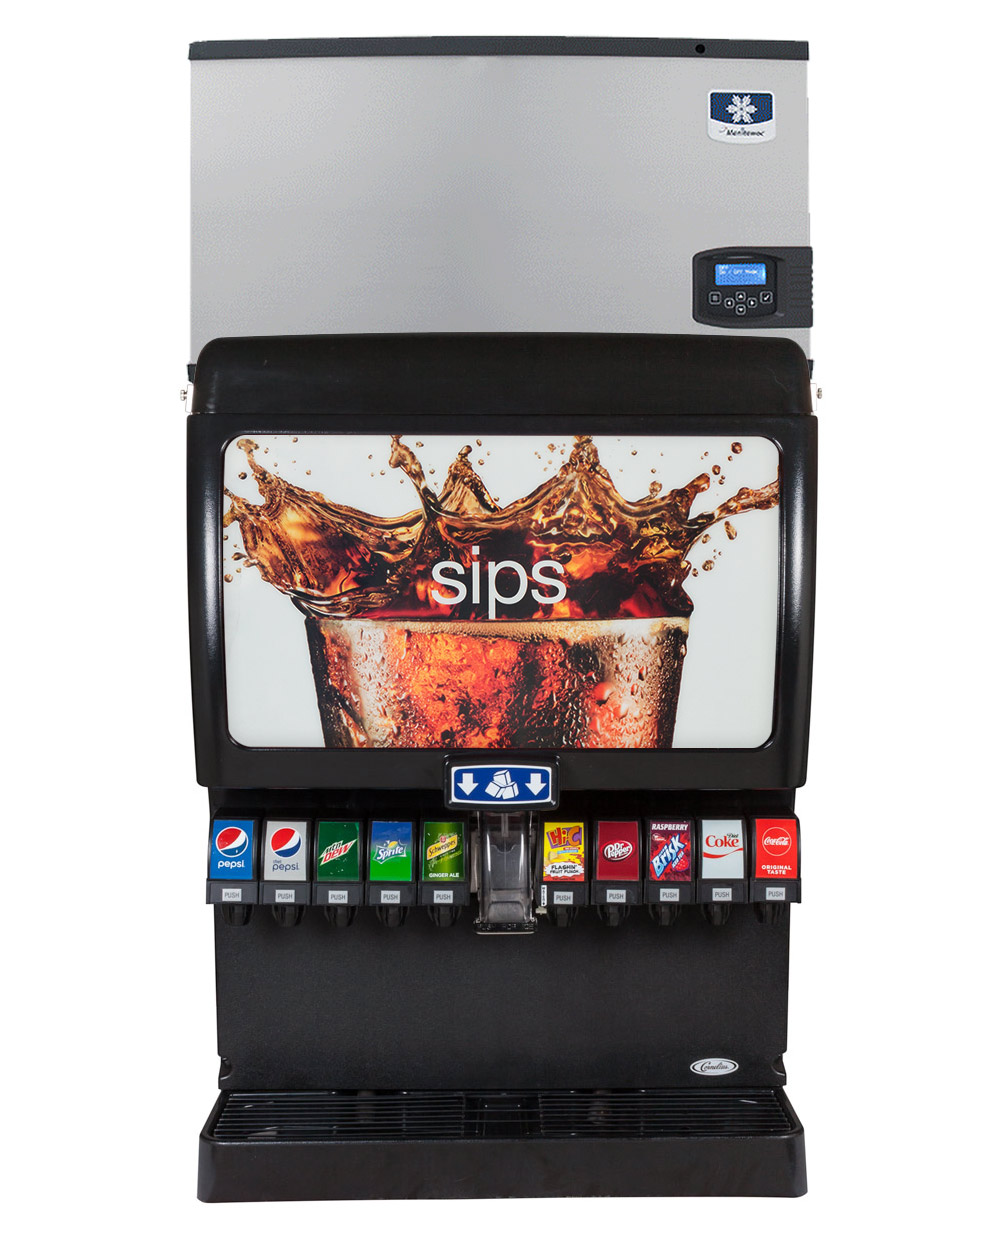 10-Flavor Ice & Beverage Soda Fountain System w/ NEW Ice Maker (front)